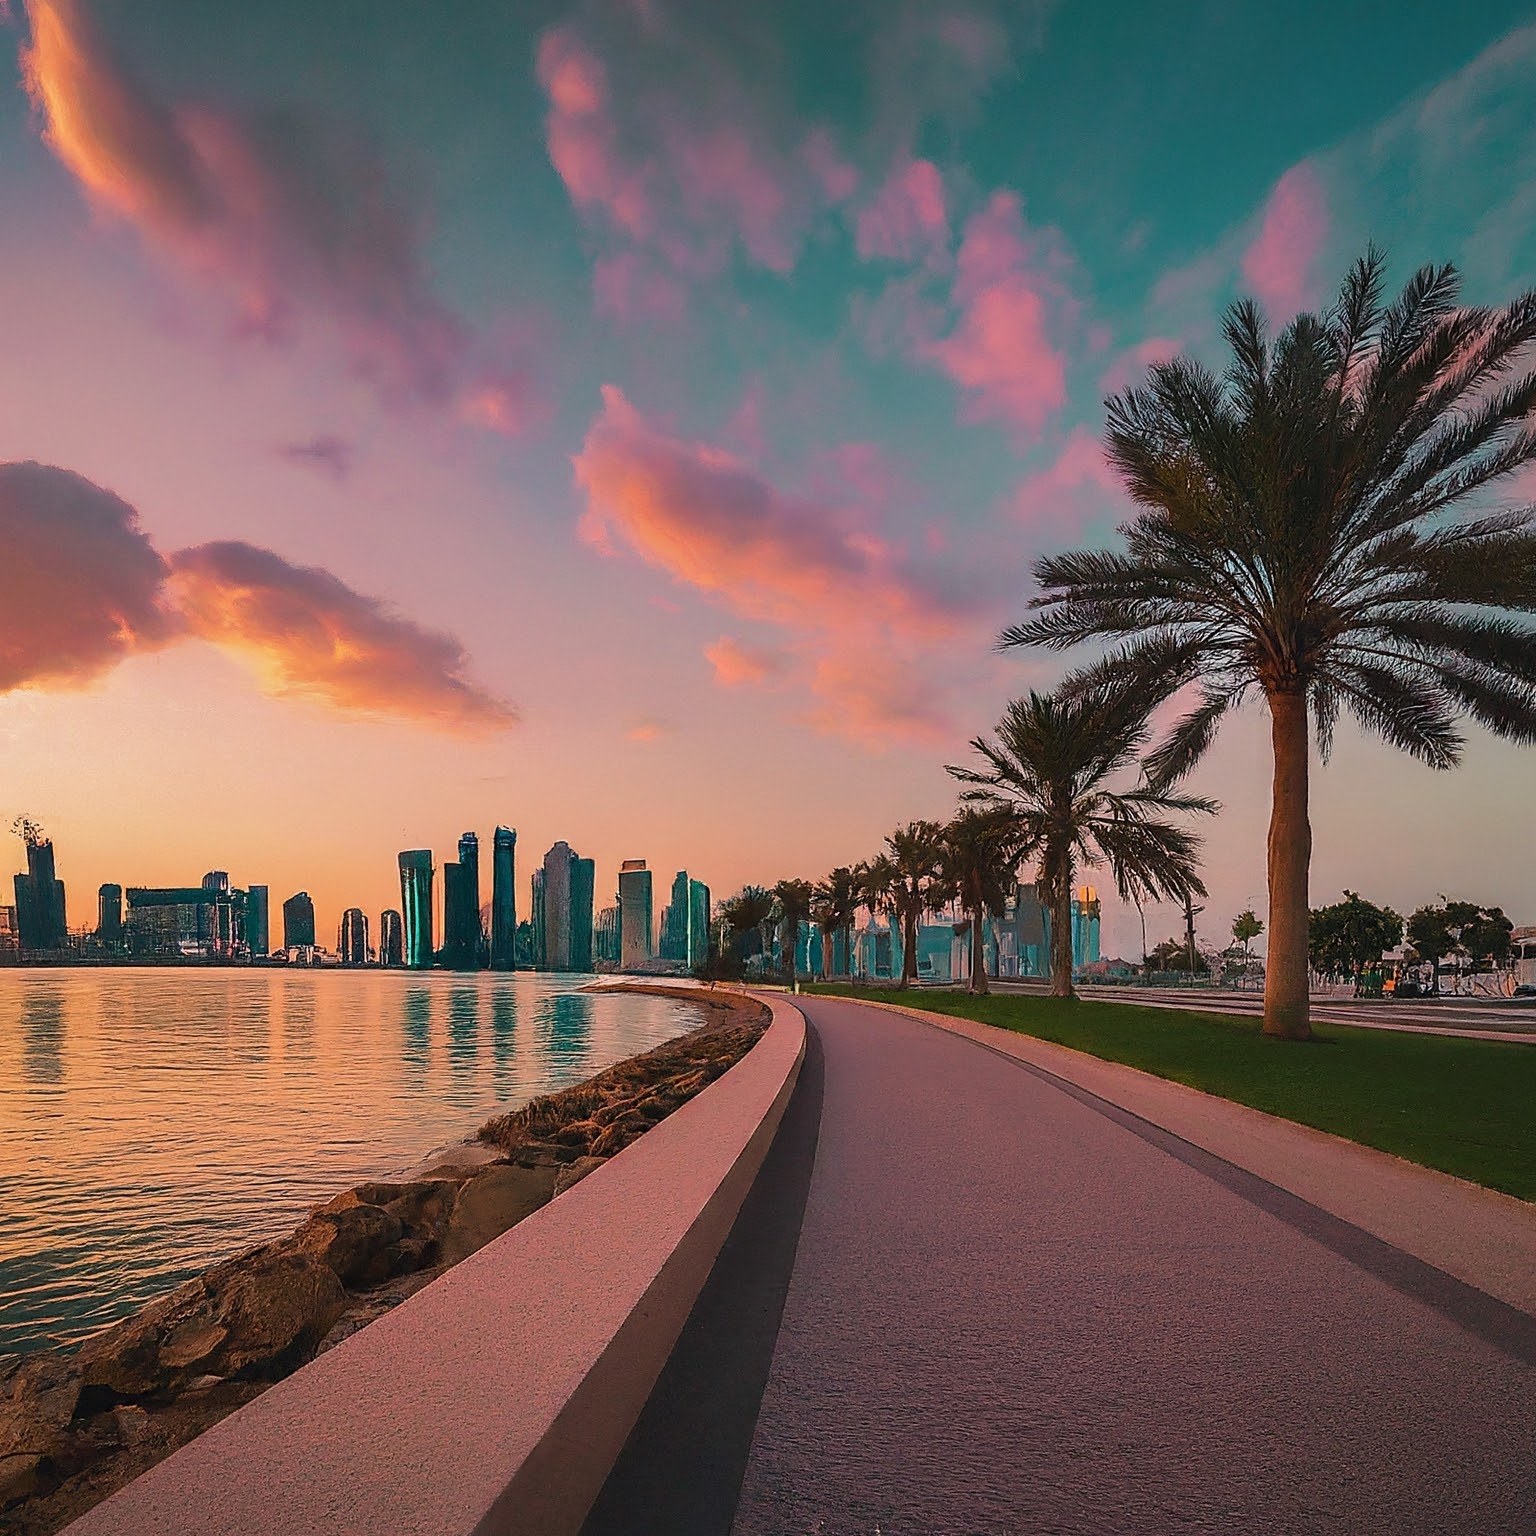 Doha Corniche at sunset with crescent-shaped walkway, palm trees, and colorful sky.